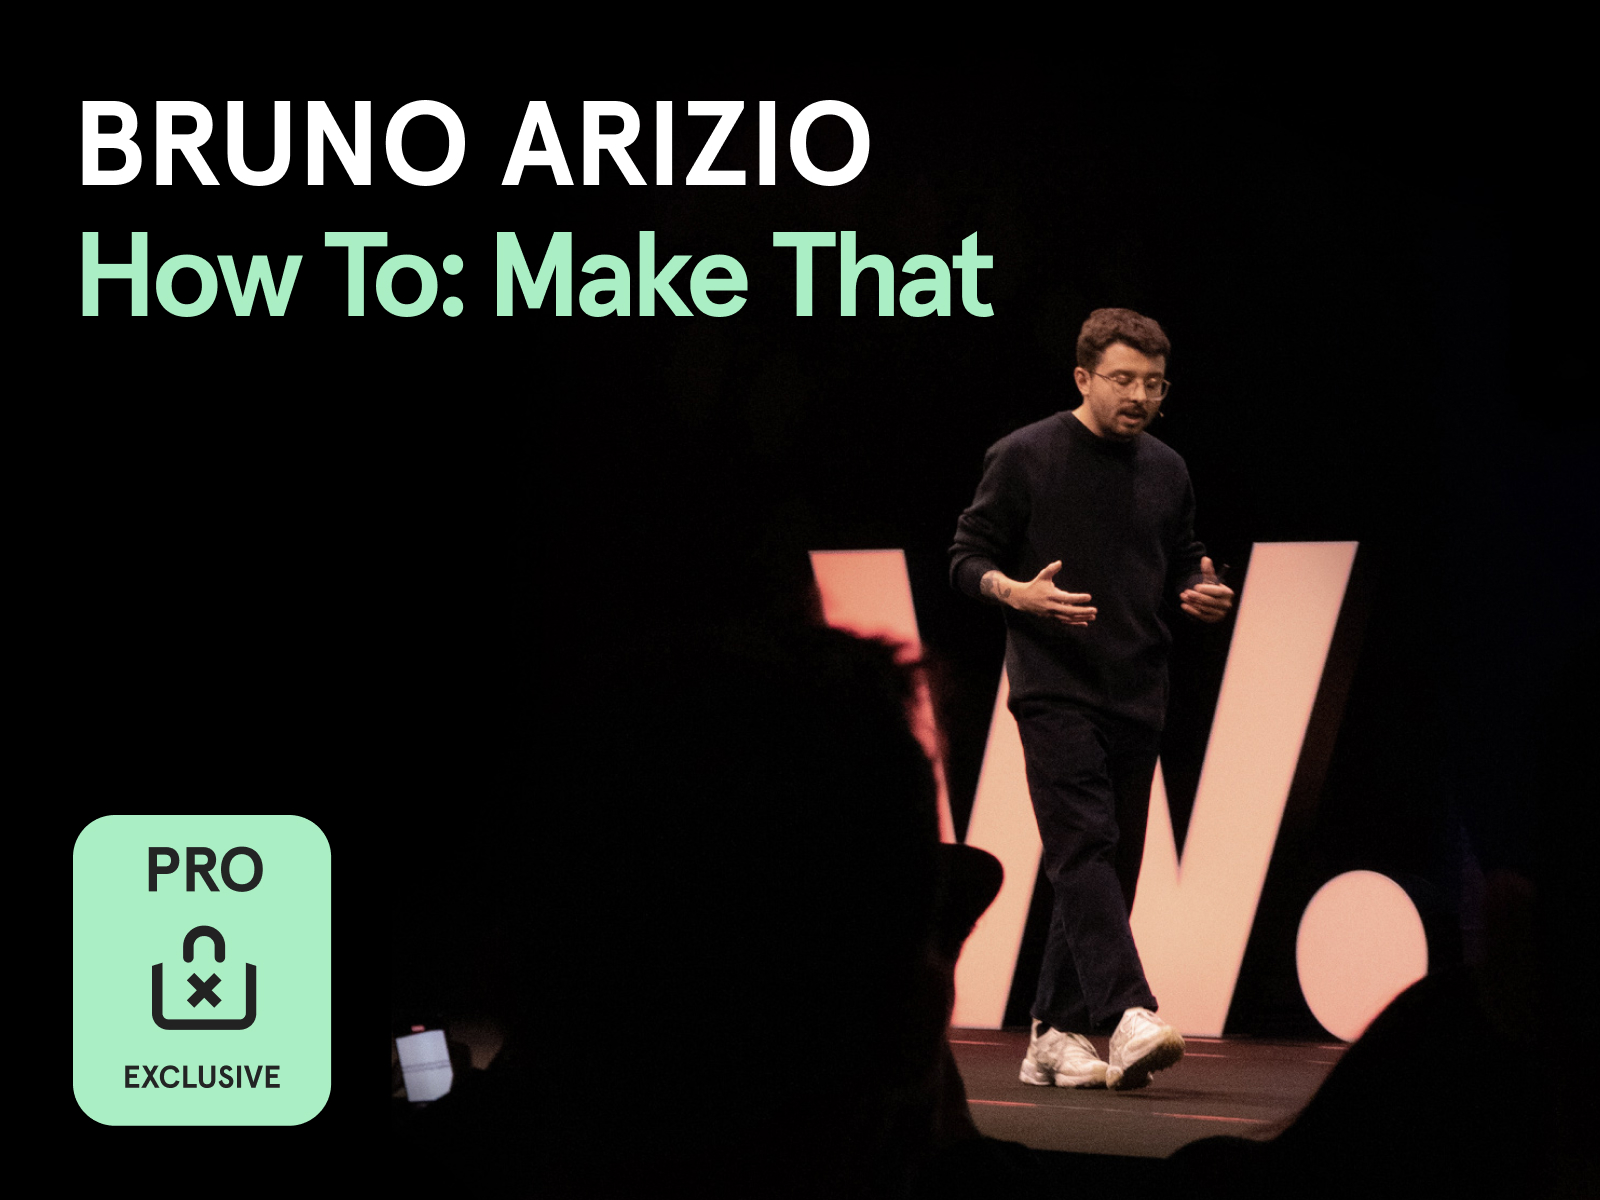 New PRO Content available: watch Bruno Arizio's new talk from Awwwards Conference Amsterdam